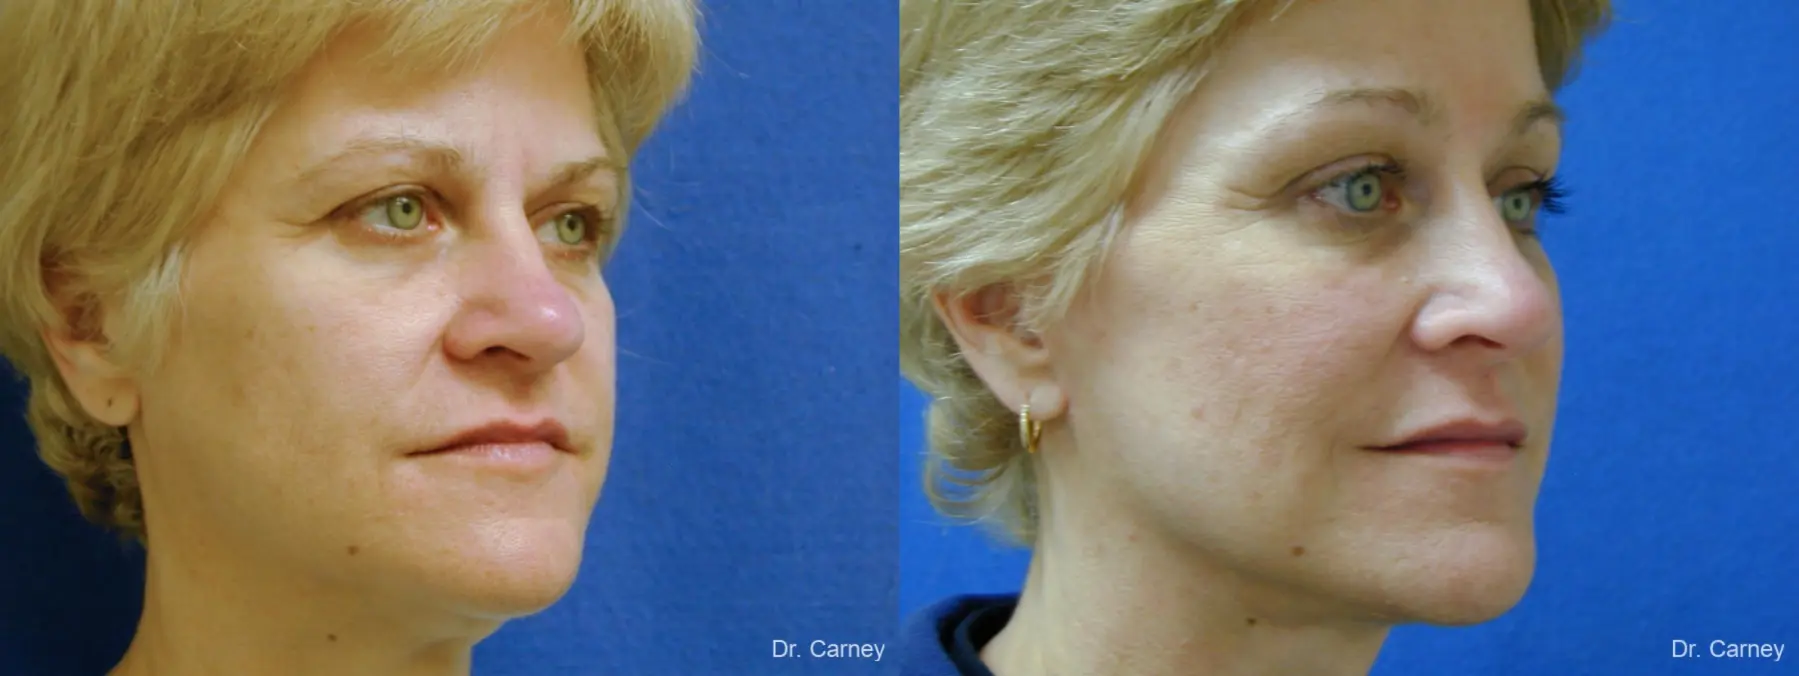 Virginia Beach Facelift 1346 - Before and After 2